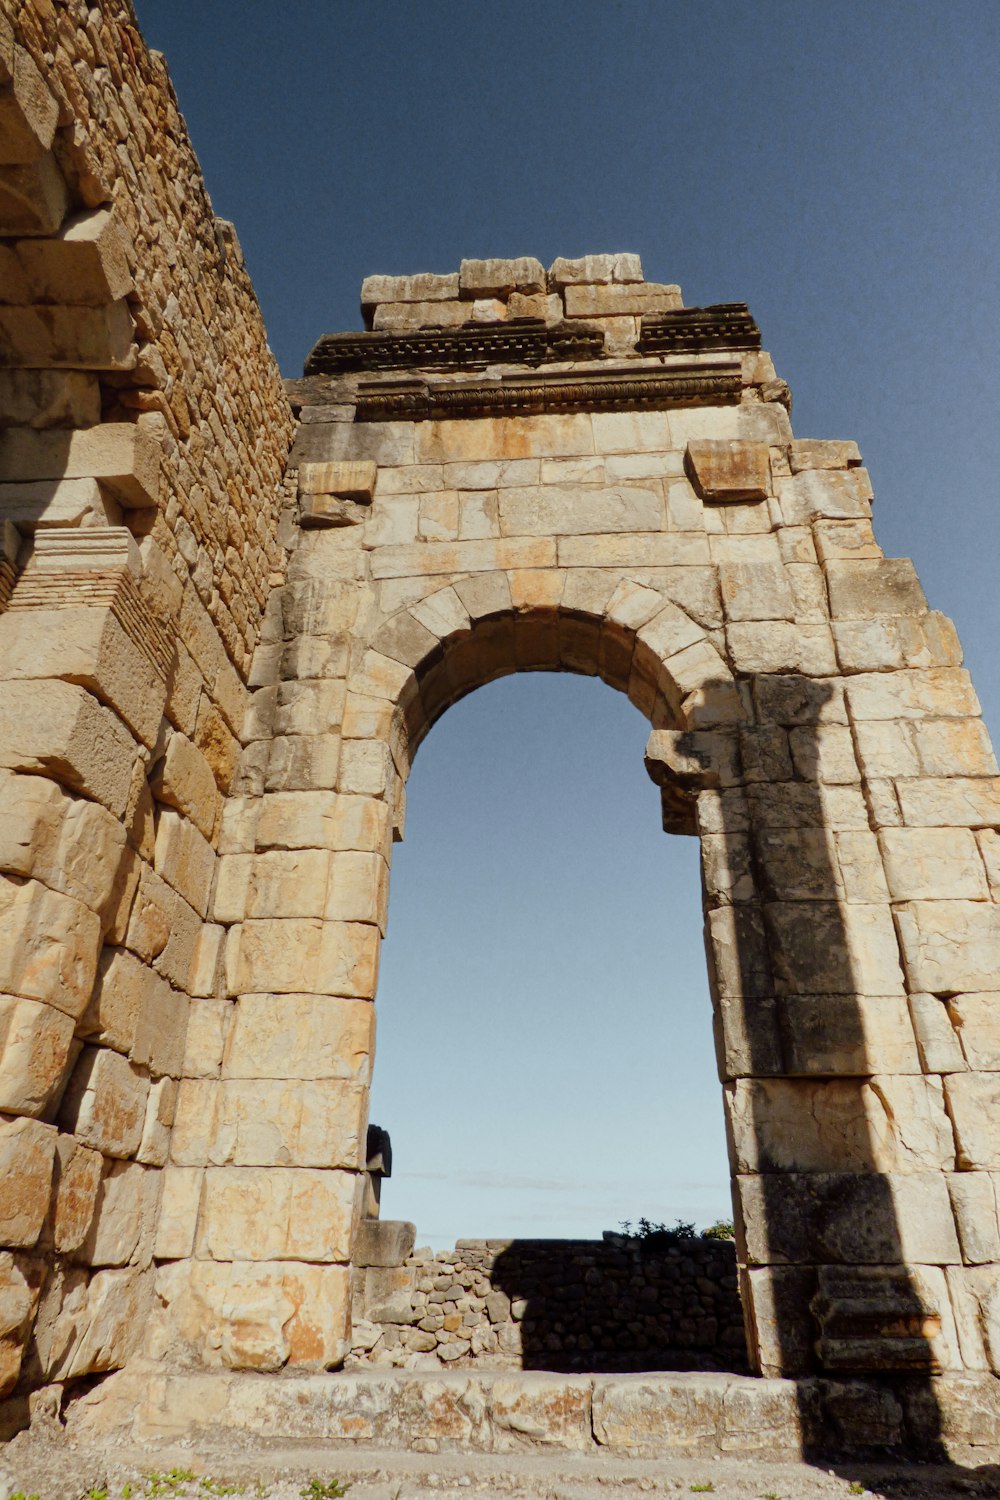 a stone arch with a clock on the top of it